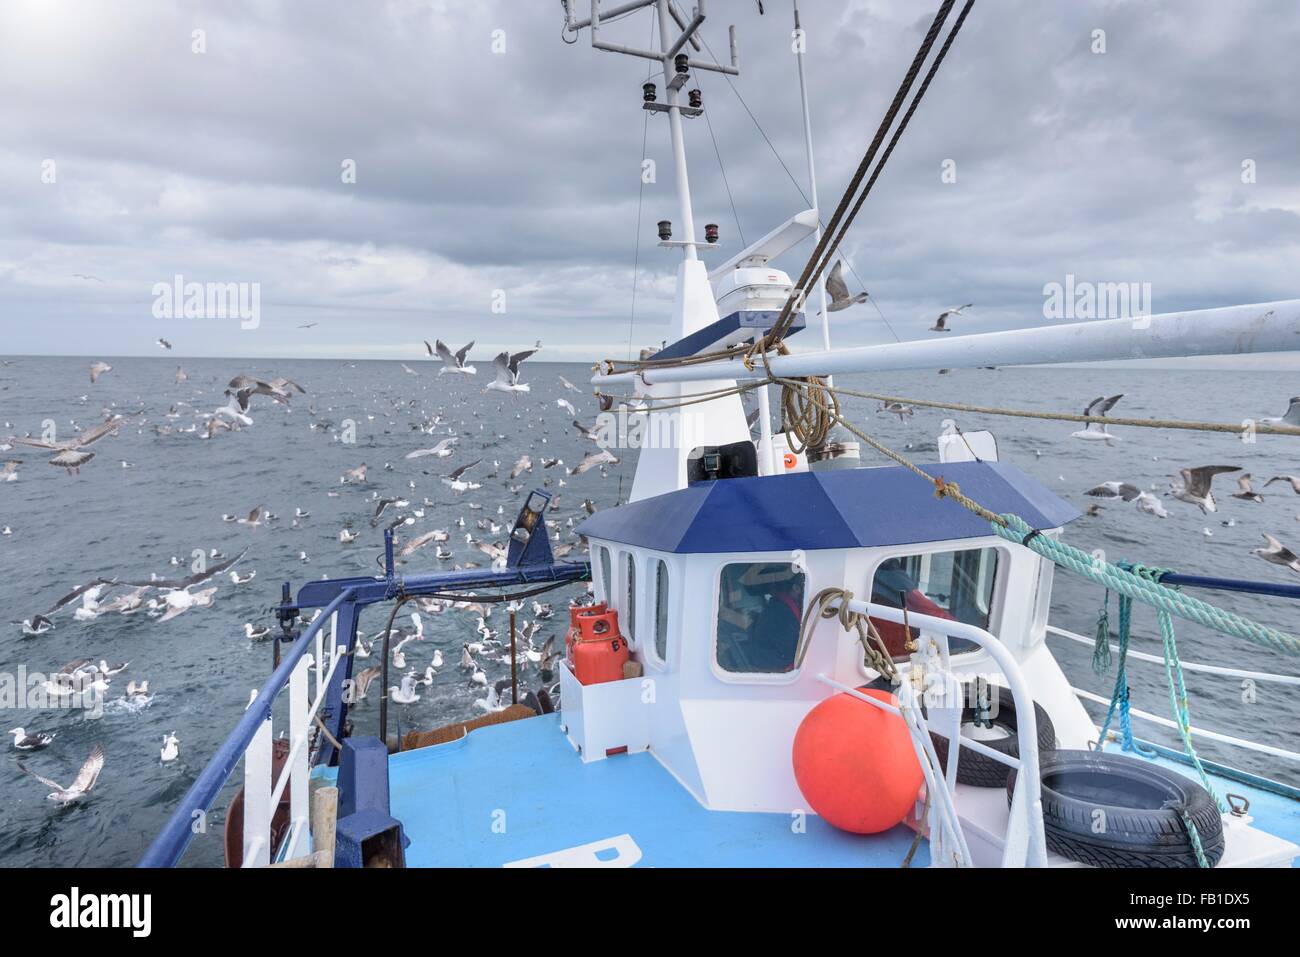 Deck view of fishing trawler with seagulls at sea Stock Photo